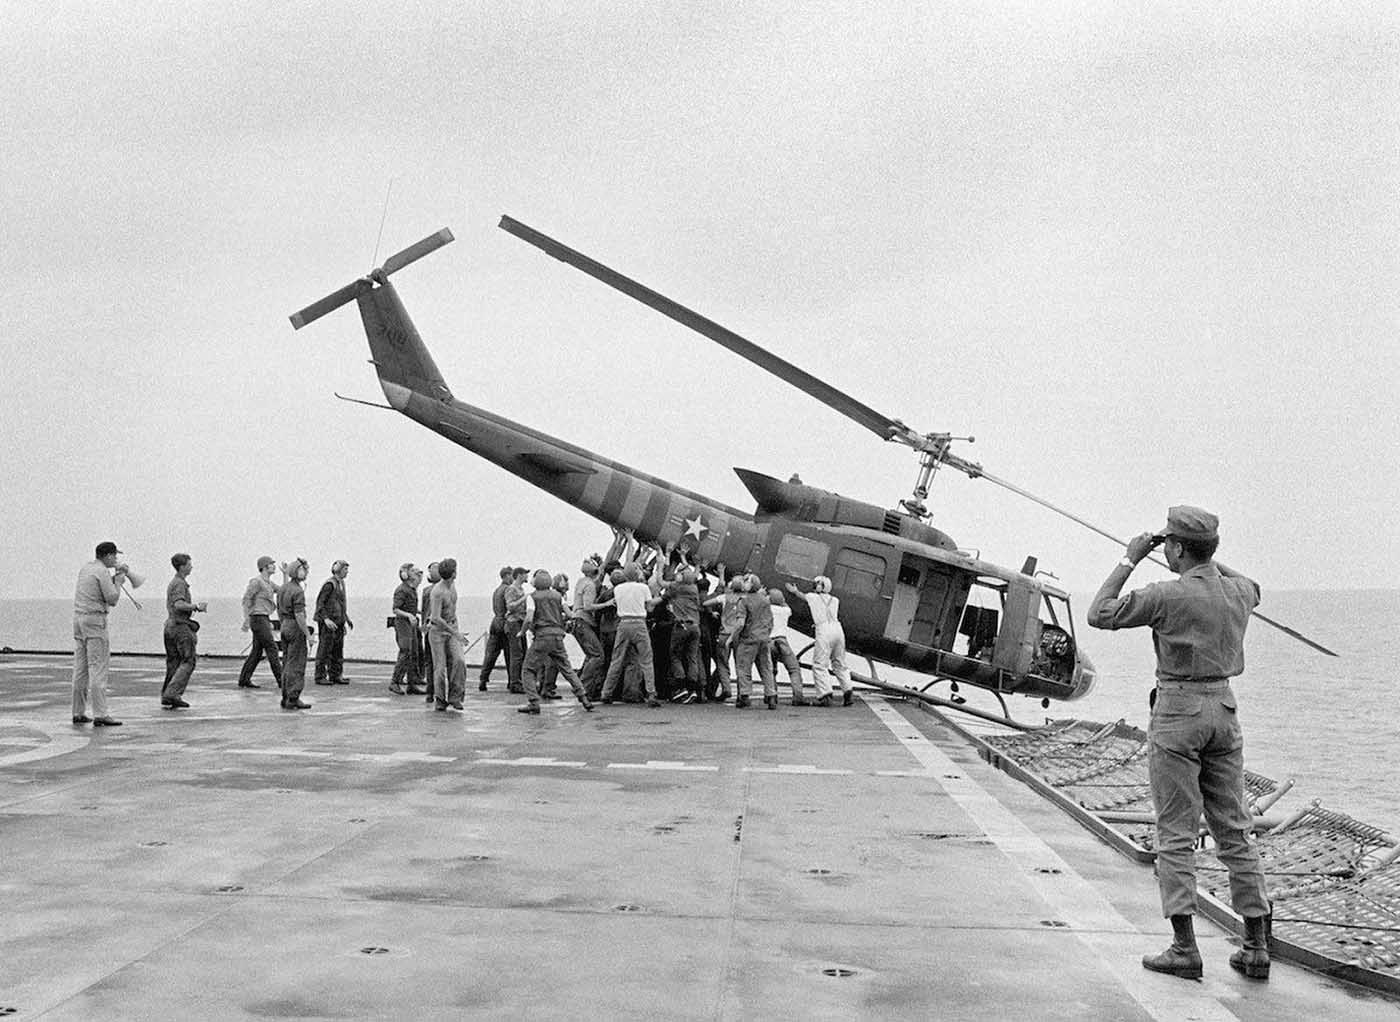 When US Military pushed Helicopters overboard to make room for Vietnam War evacuees, 1975